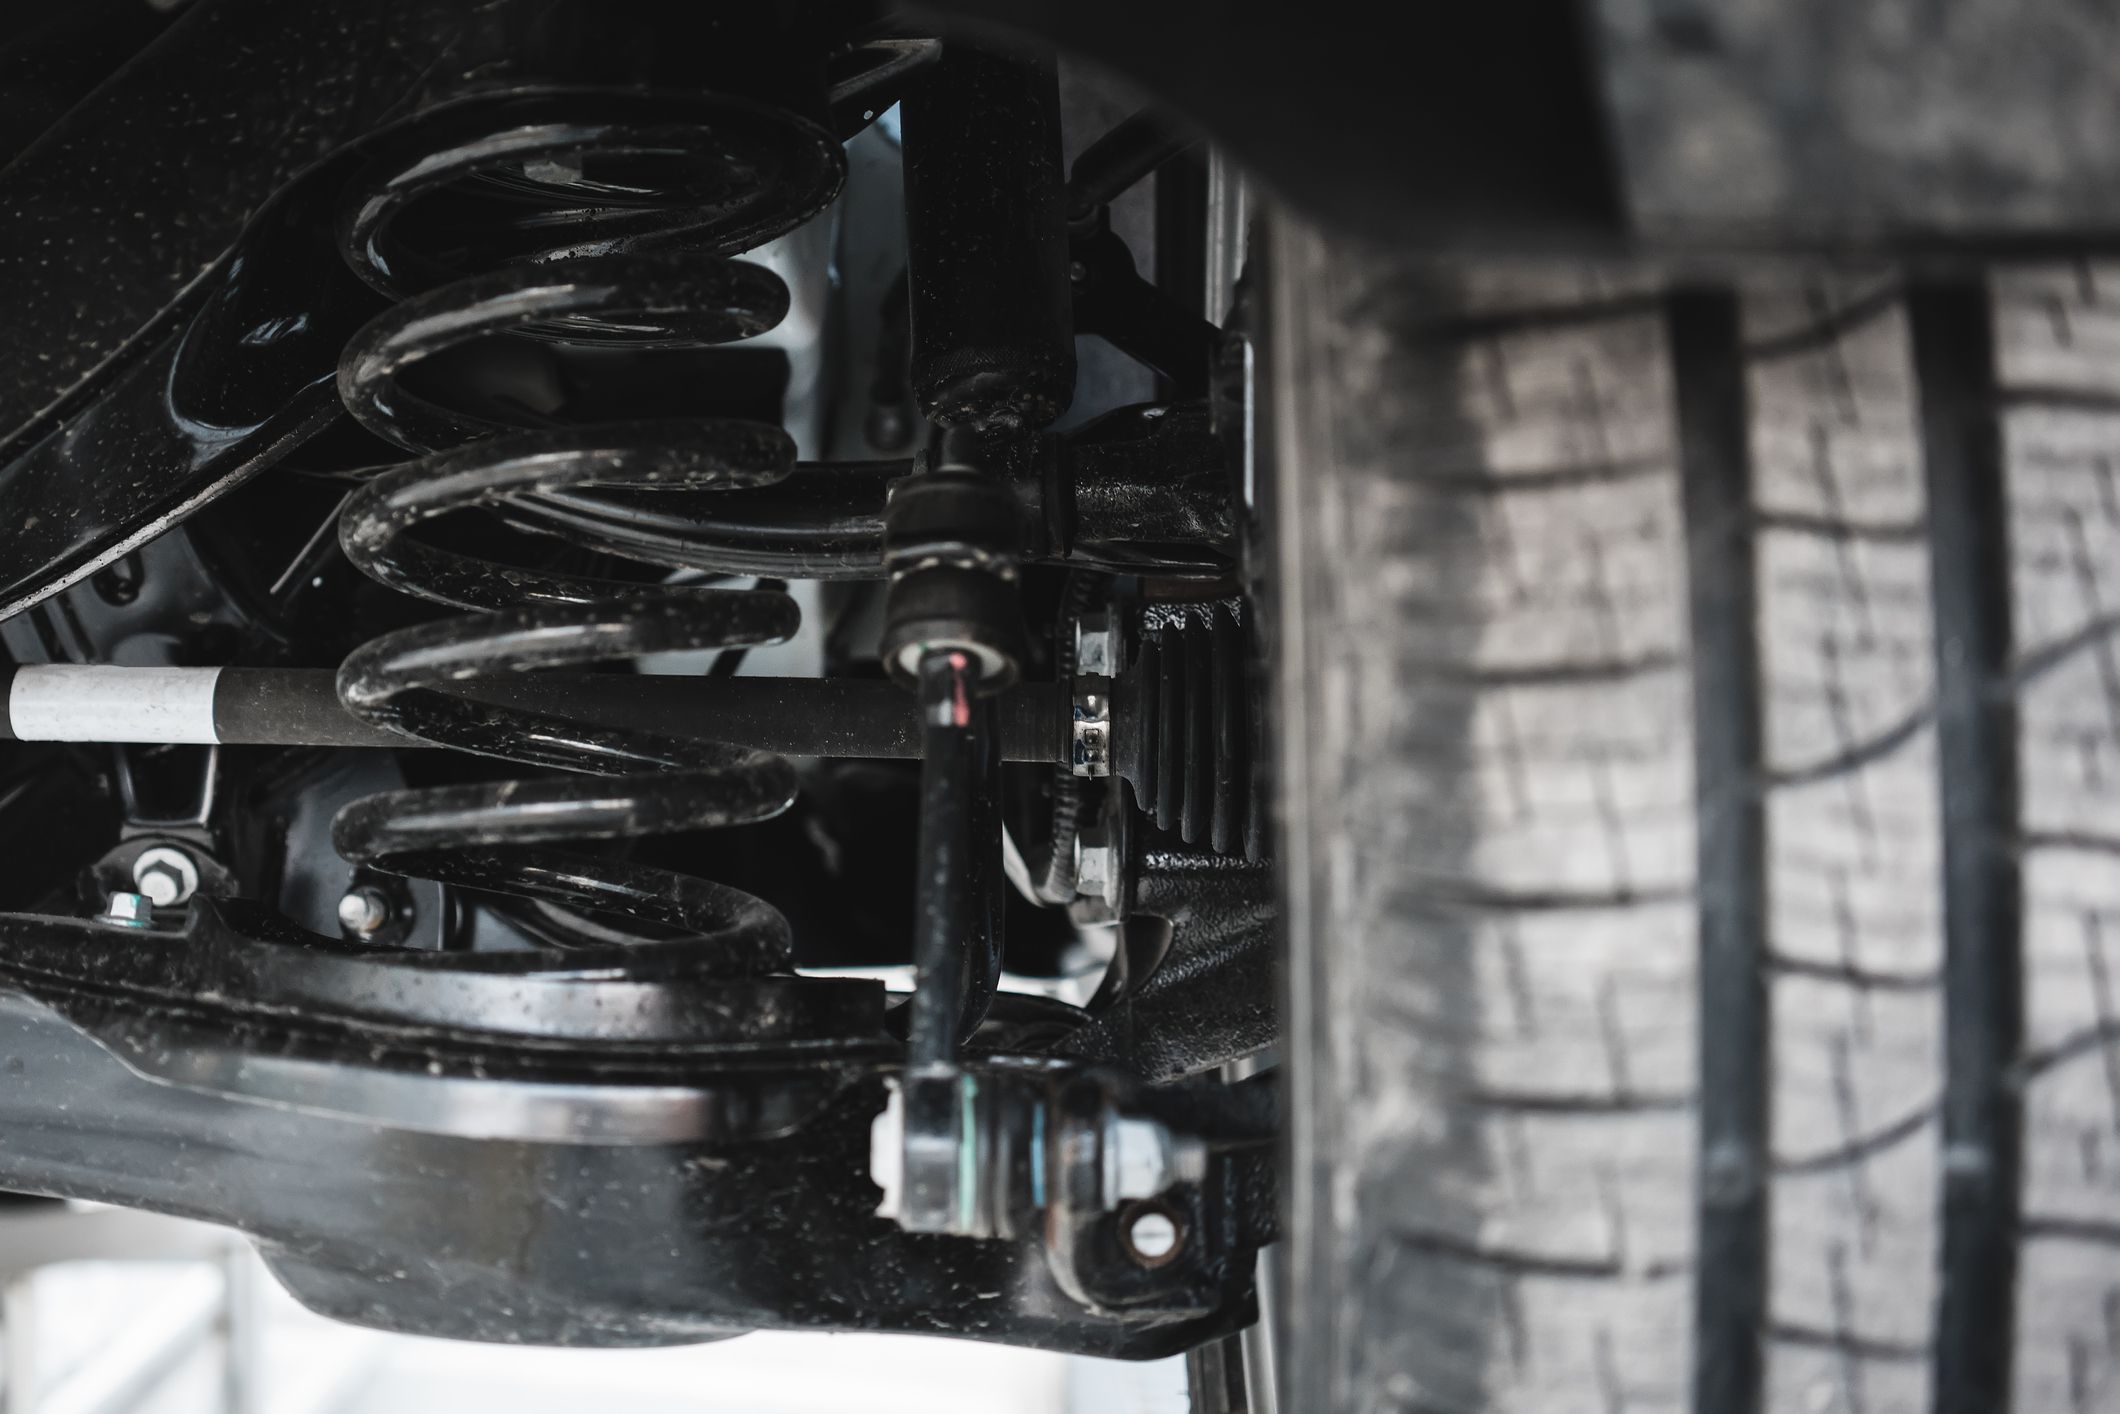 <p class="paragraph">How much? $3,500</p><p class="paragraph">When your suspension system is working, it’s a smooth ride in your car. It takes shocks, struts, springs, tie rods and control arms to keep that ride smooth. If you need replacement parts, you aren’t going to like it: up to $900 to replace your struts, the most expensive of the parts. If you need an entire suspension overhaul, the repair costs add up quite a bit.</p><p class="paragraph">Save money: Rotating your tires also keeps your suspension aligned. You should also regularly check that your tires have the right air pressure as driving on uneven tires can mess with your suspension too. If you notice your car pulling to one side of the road, that’s time to take it into a ship.</p>